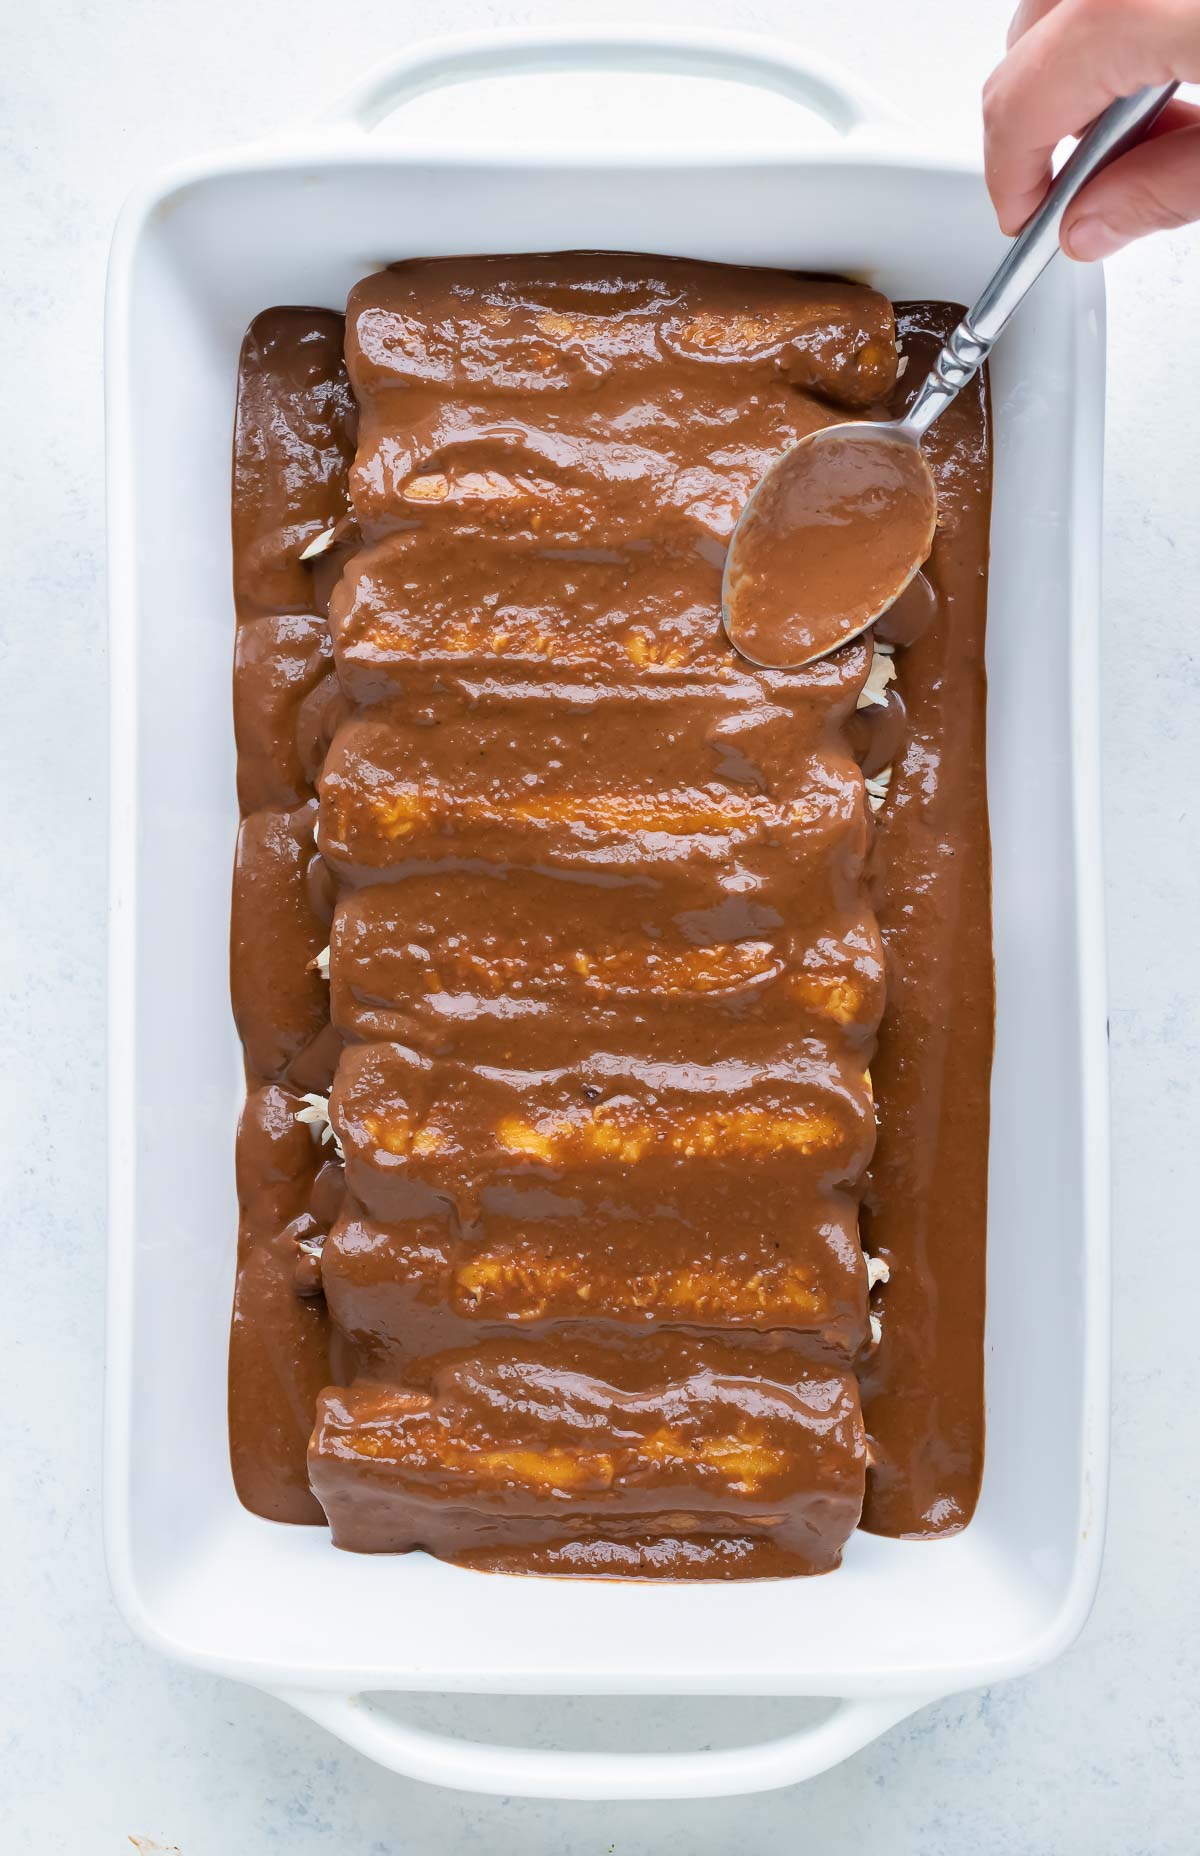 Authentic mole sauce is used to cover the enchiladas.